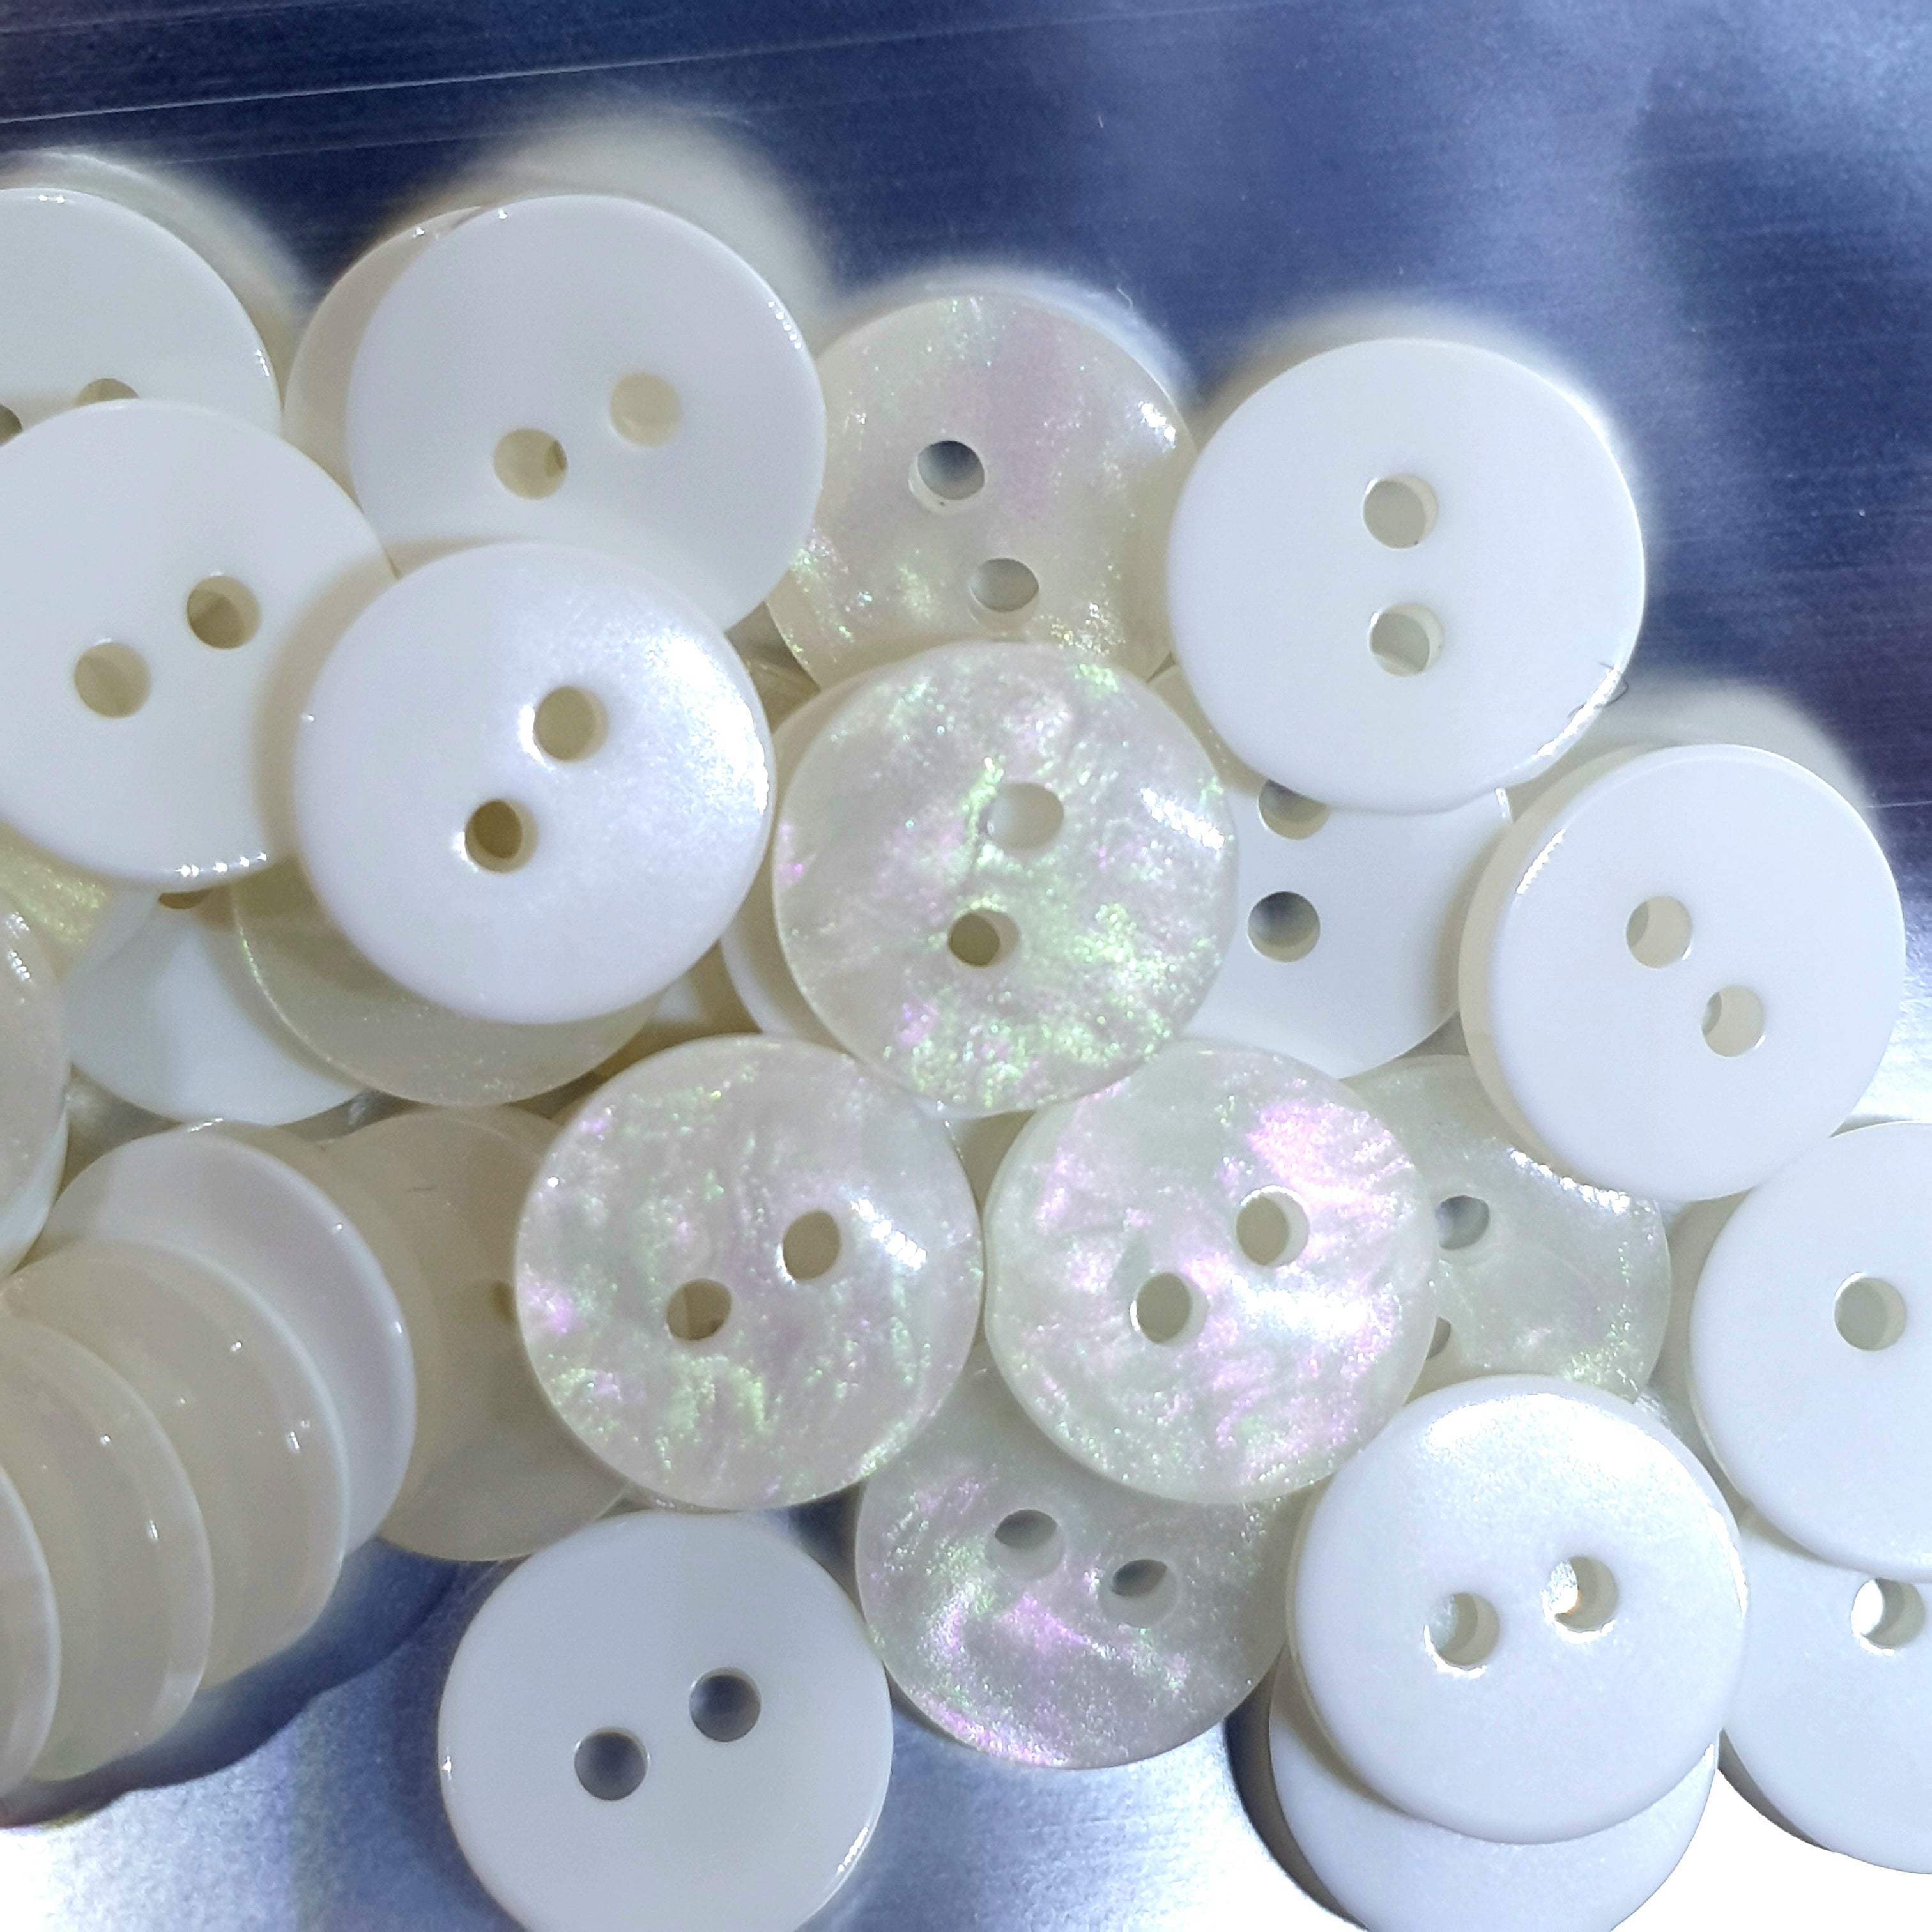 MajorCrafts 60pcs 10mm Cream White Pearlescent Galaxy Effect 2 Holes Small Round Resin Sewing Buttons